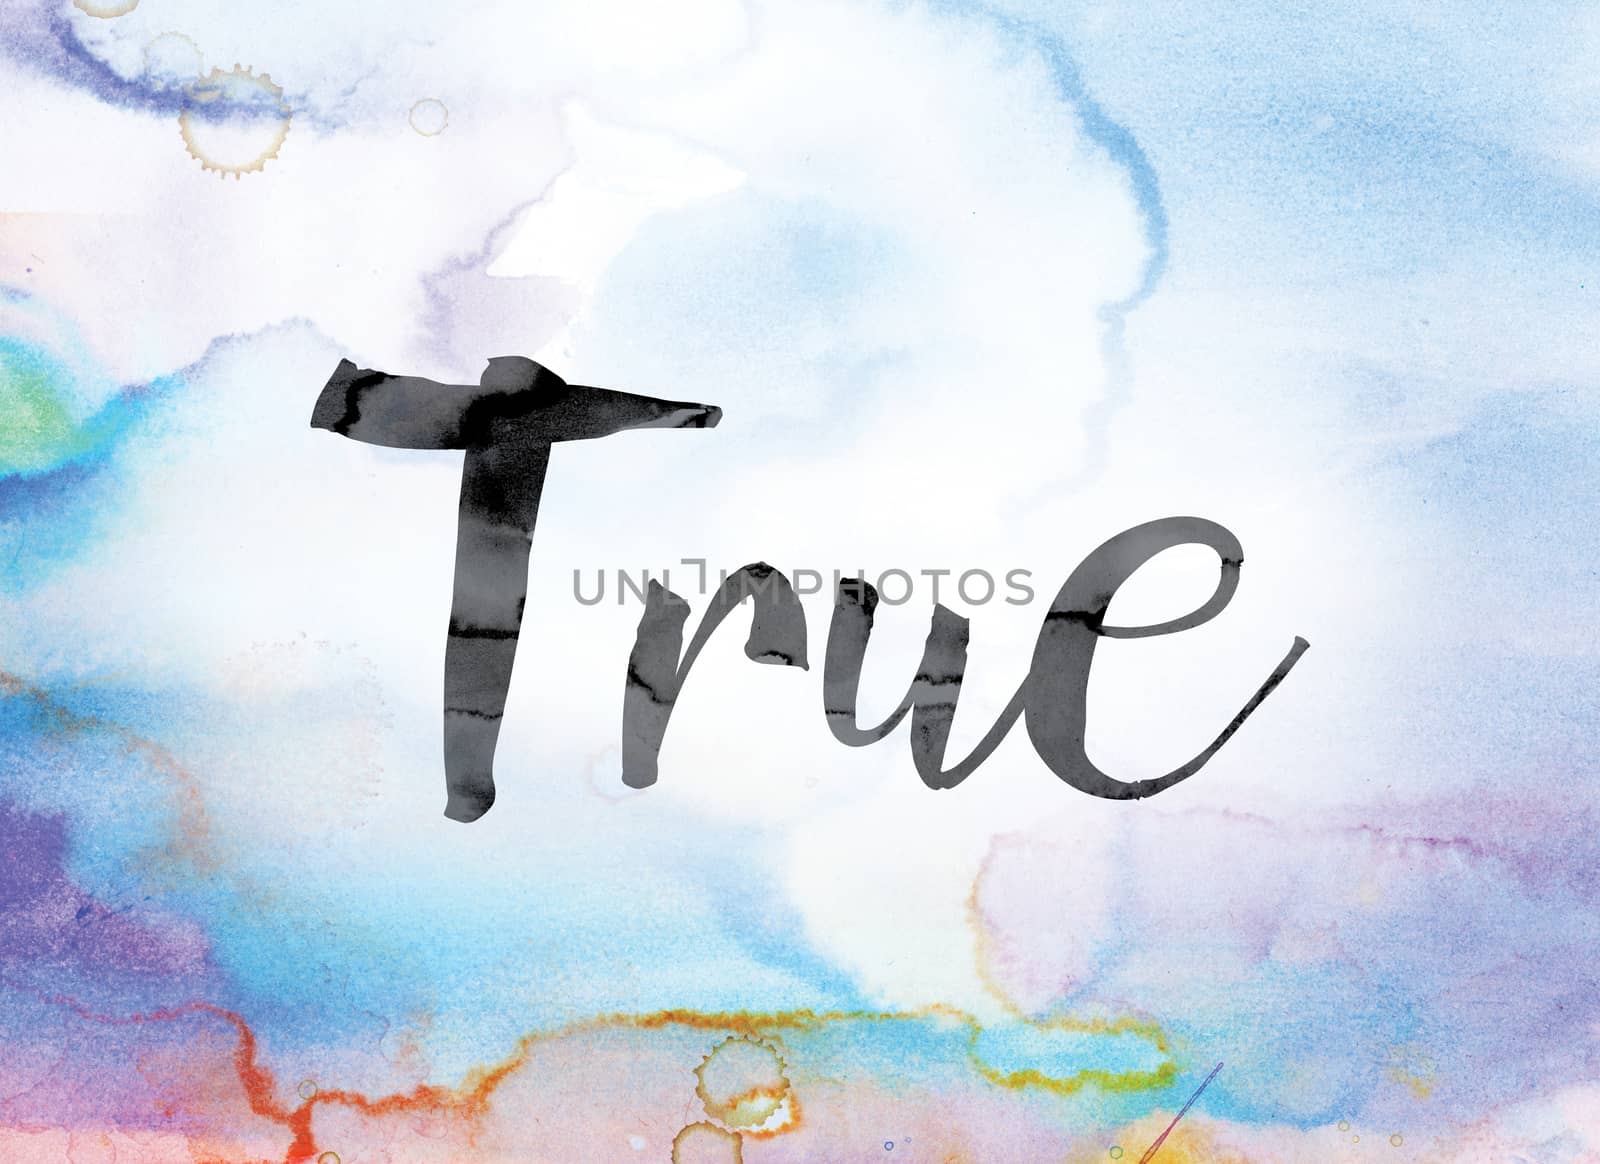 The word "True" painted in black ink over a colorful watercolor washed background concept and theme.